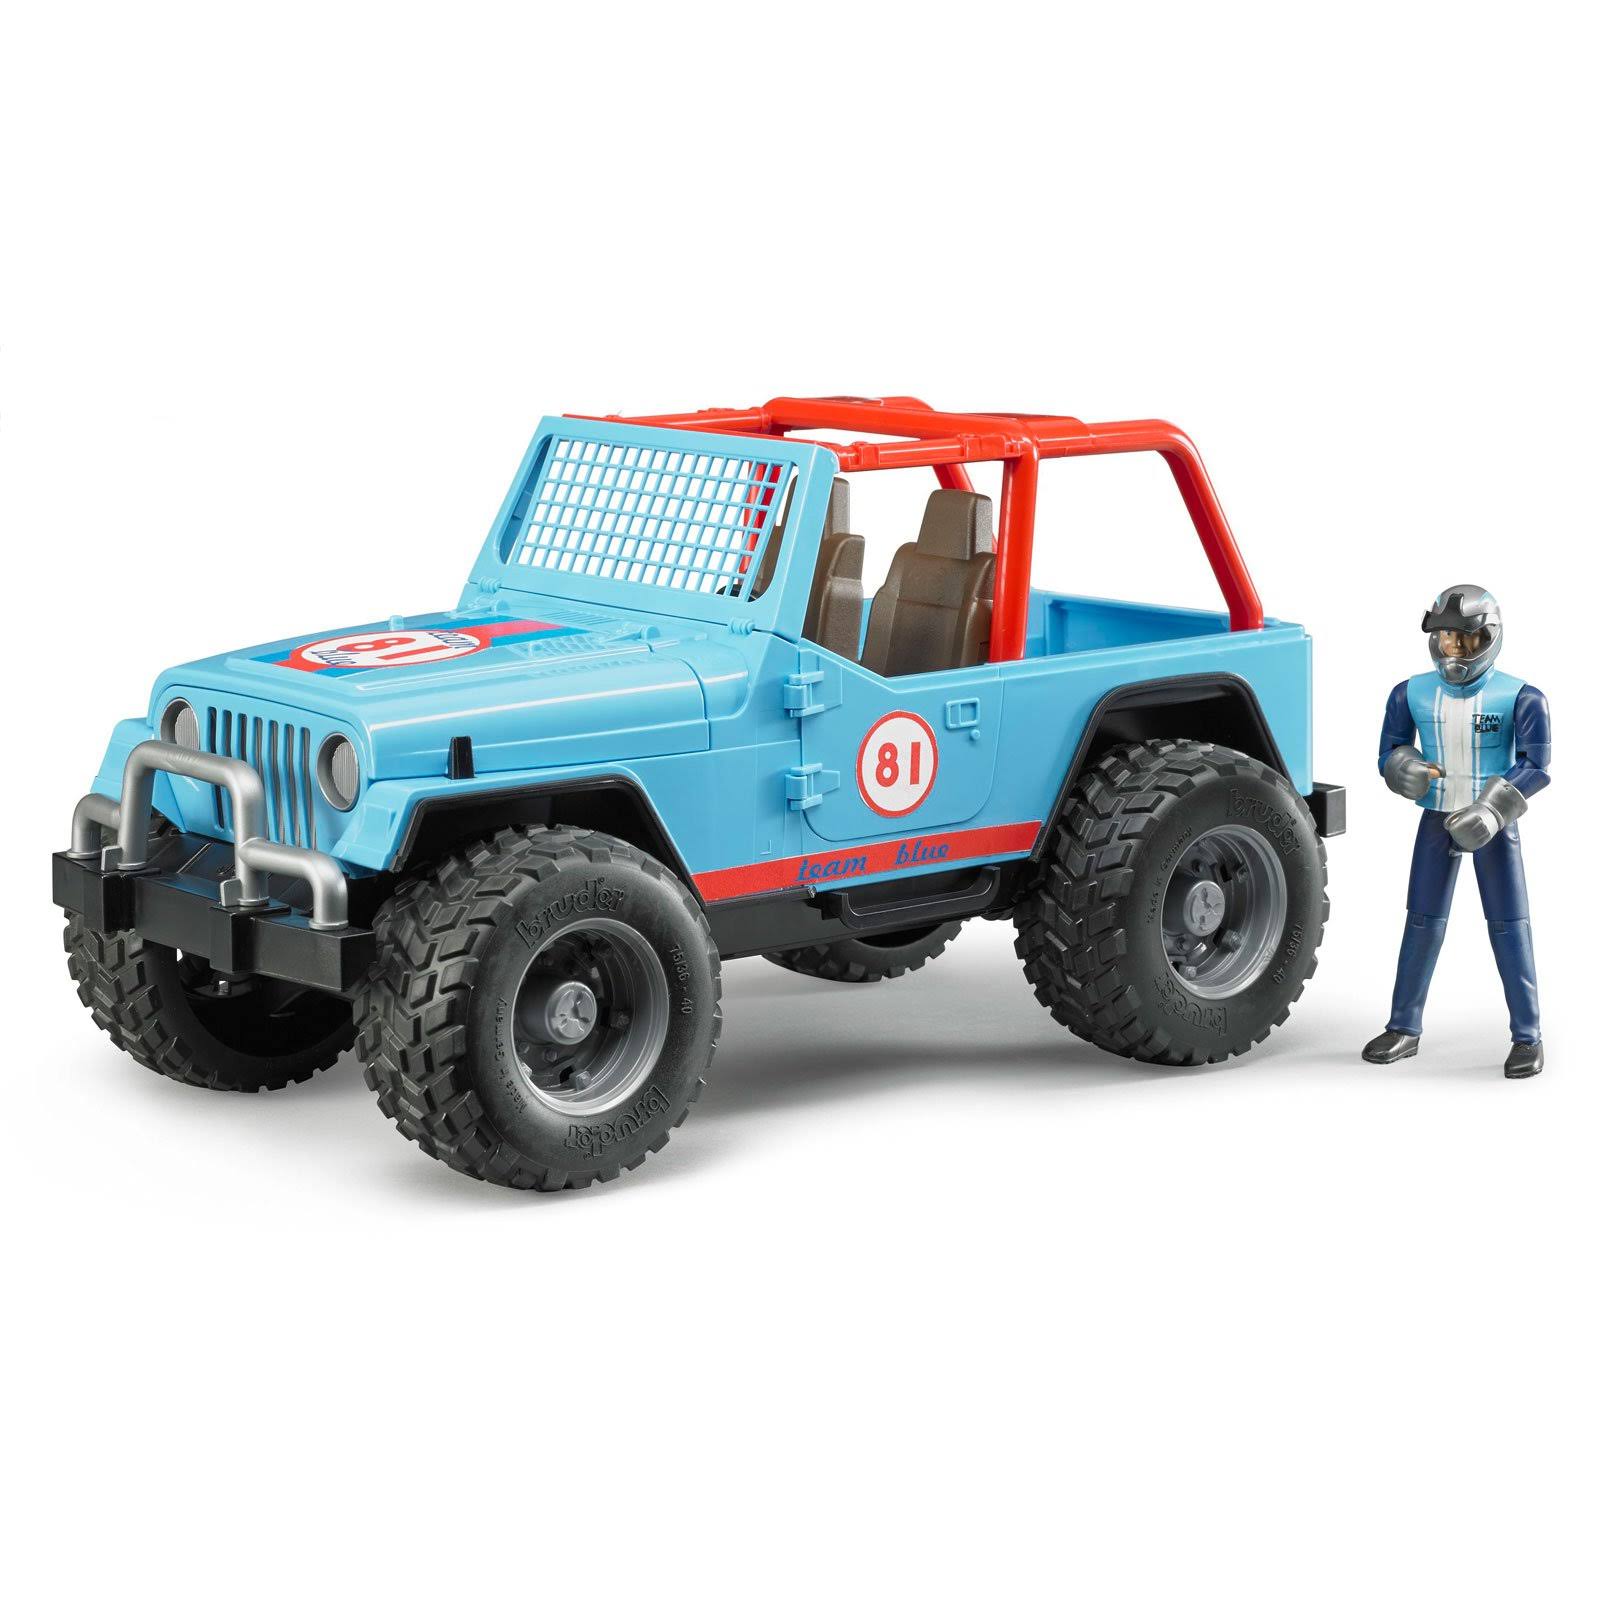 Bruder : Jeep Cross country racer blue with driver